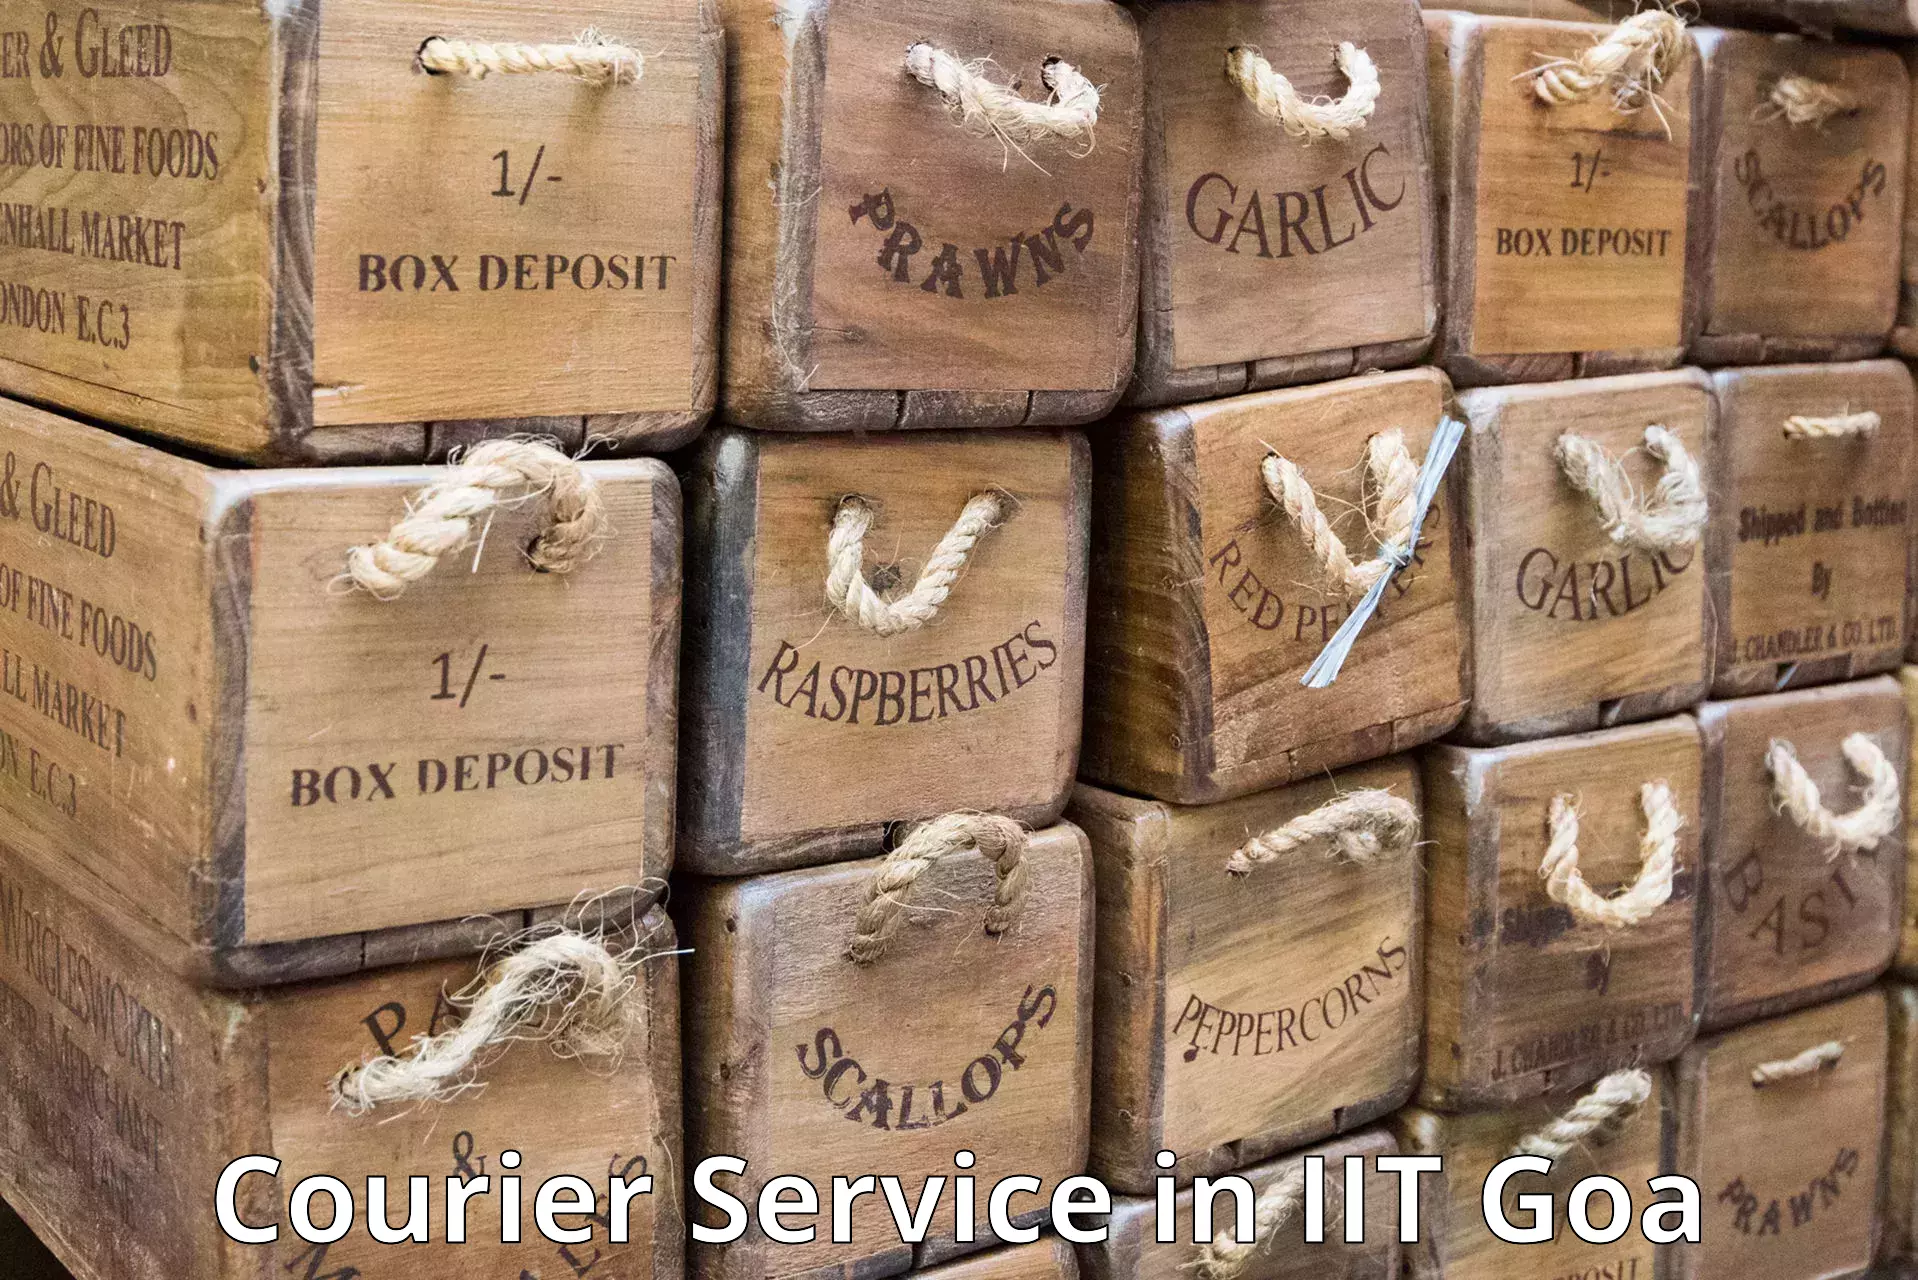 24/7 courier service in IIT Goa